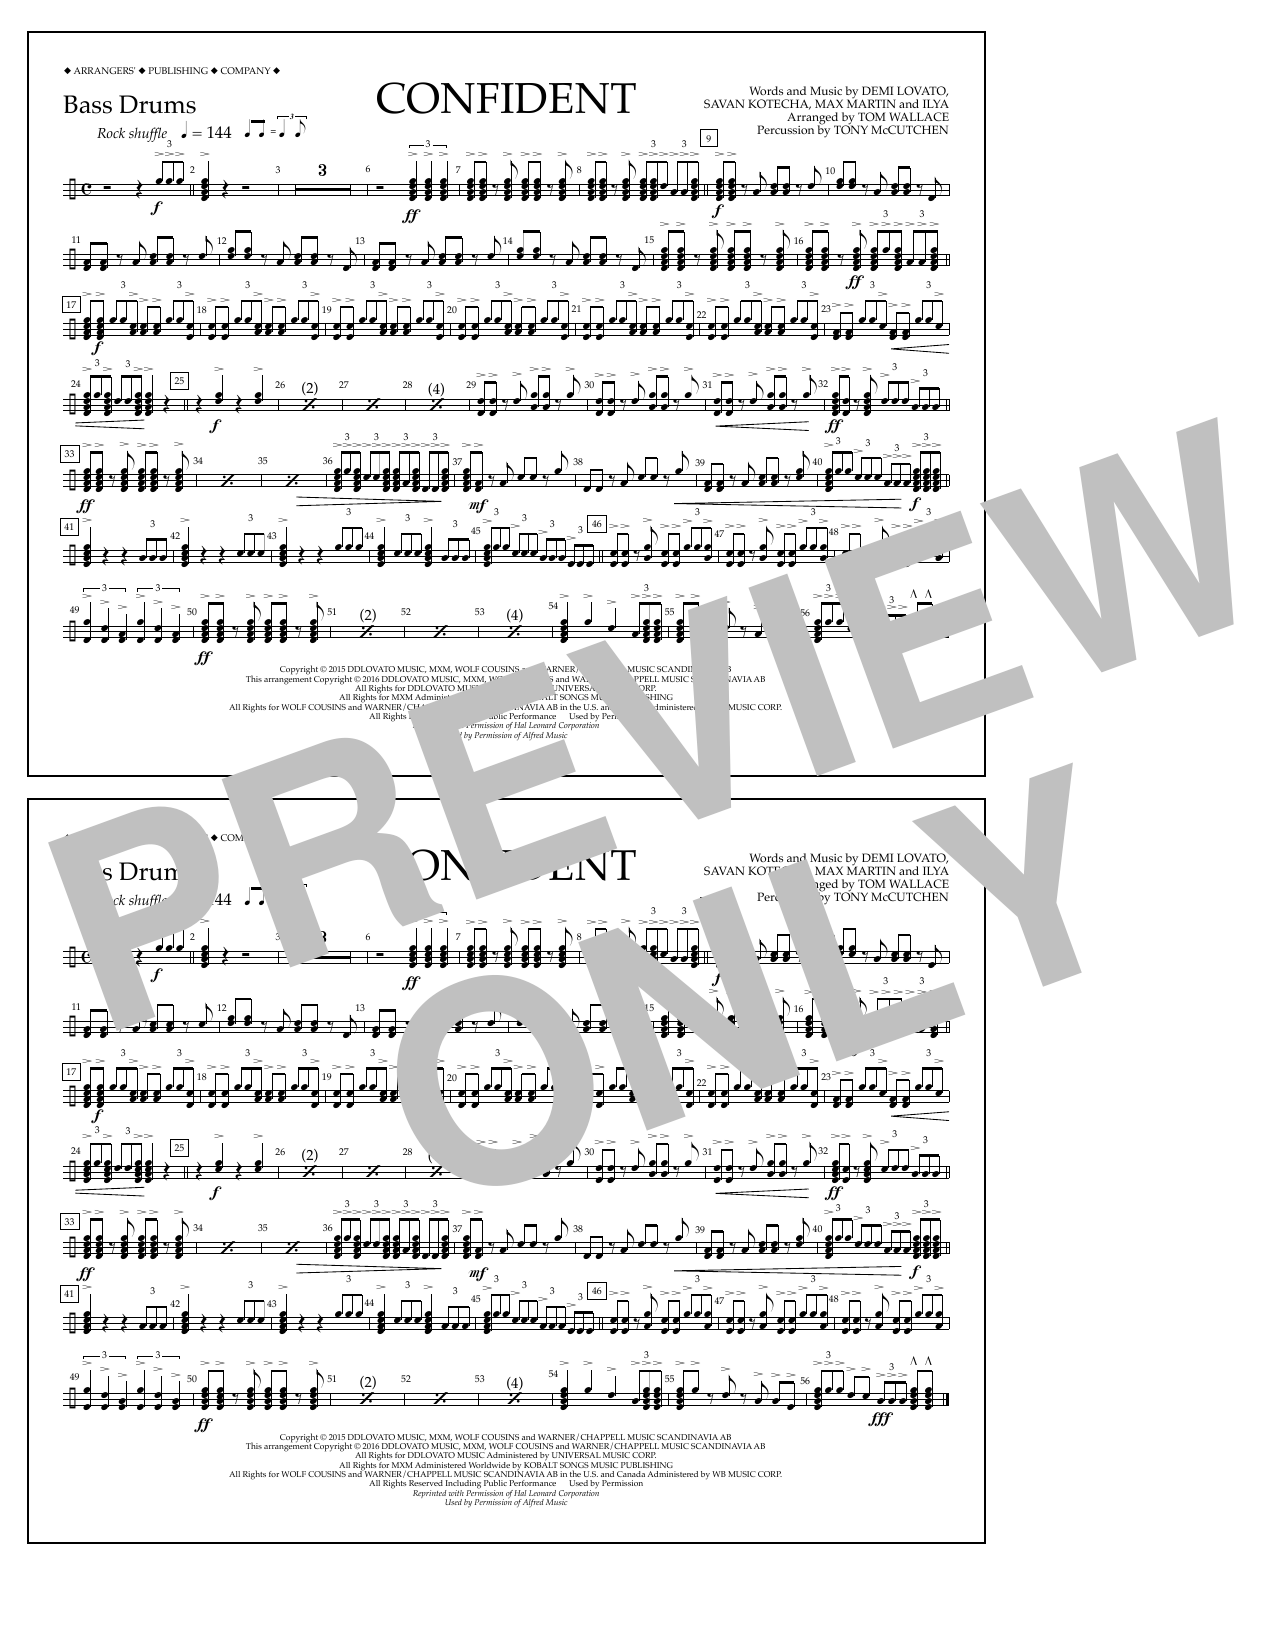 Download Tom Wallace Confident - Bass Drums Sheet Music